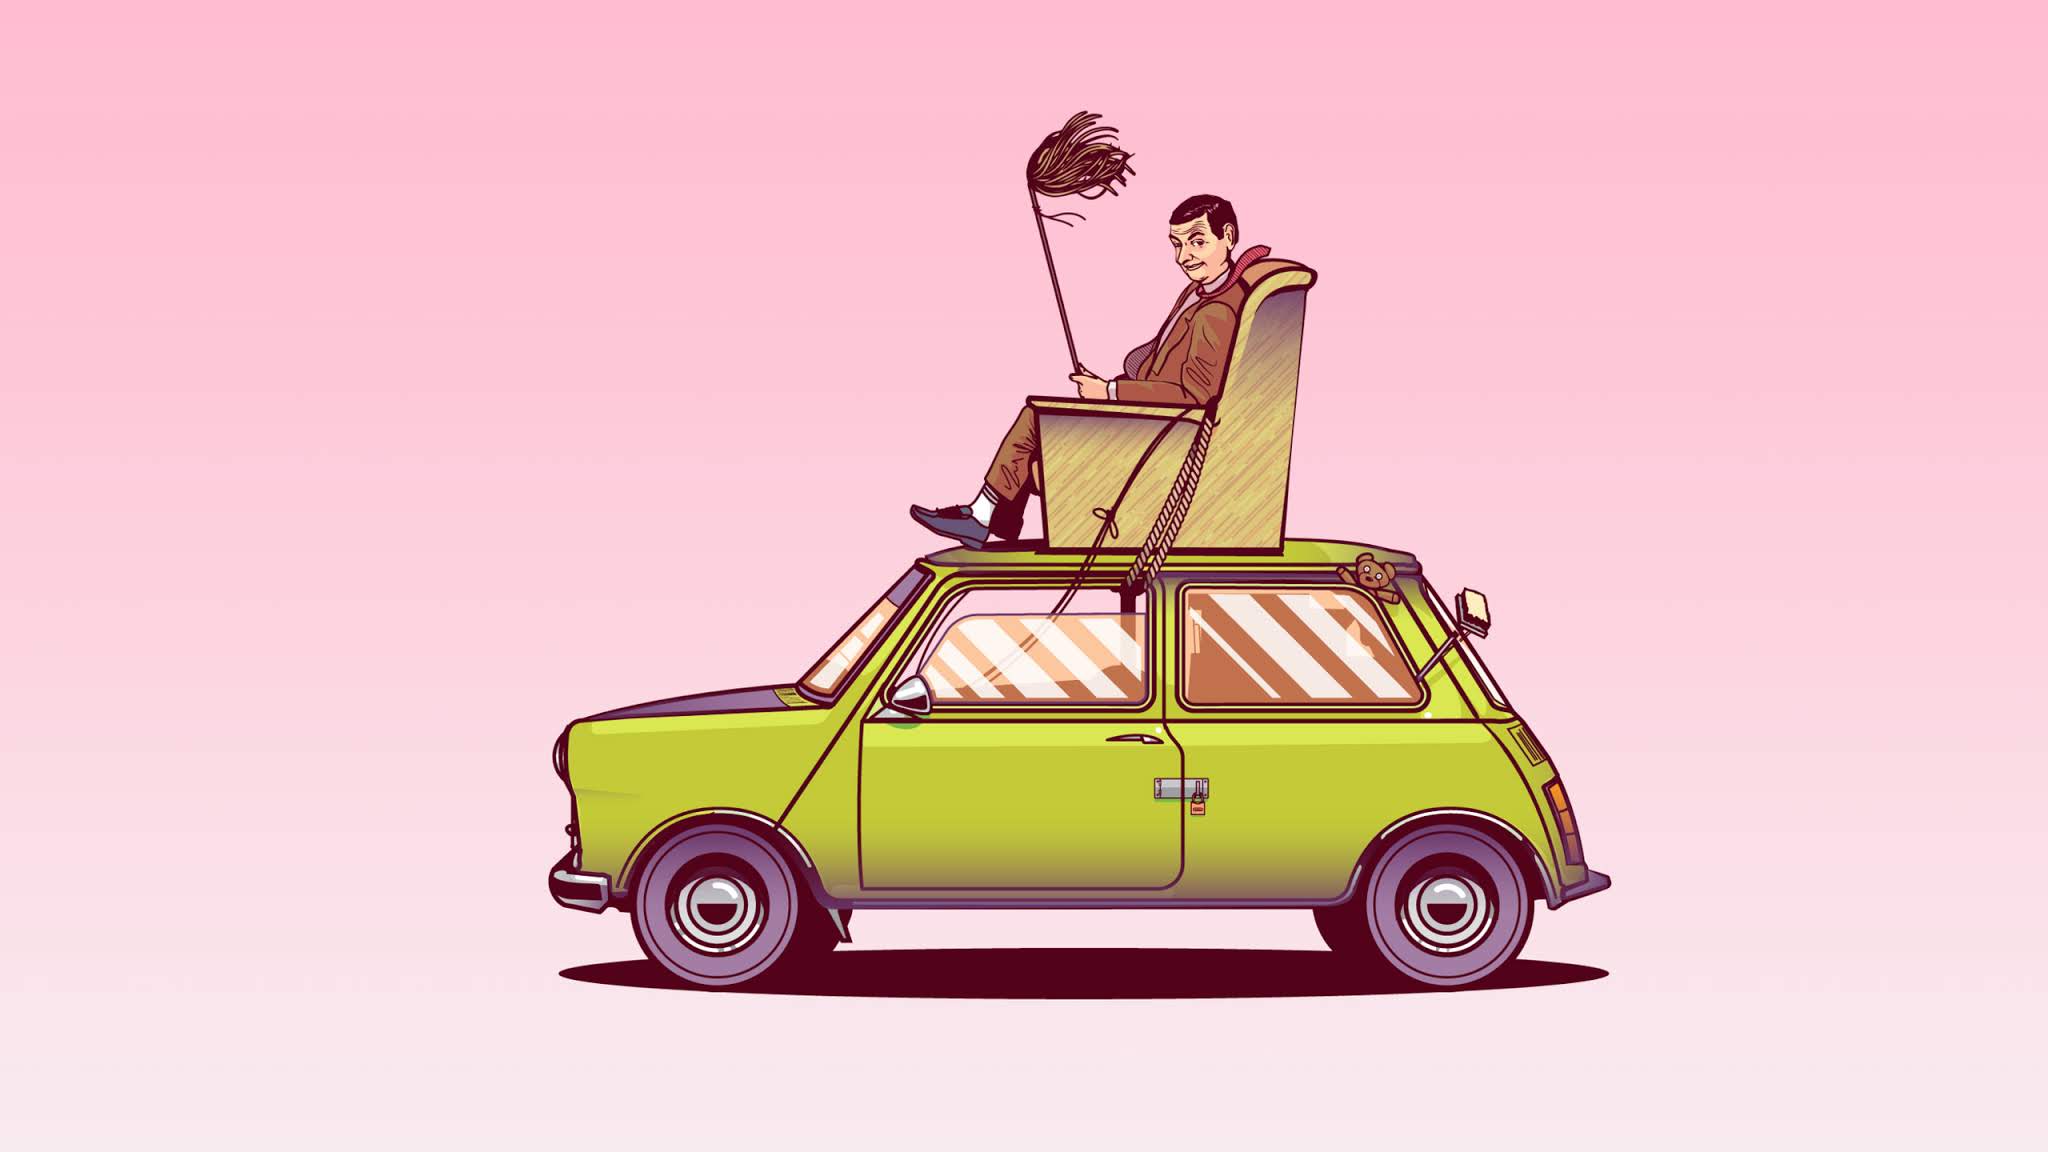 Mr Bean Sitting on Top of His Car